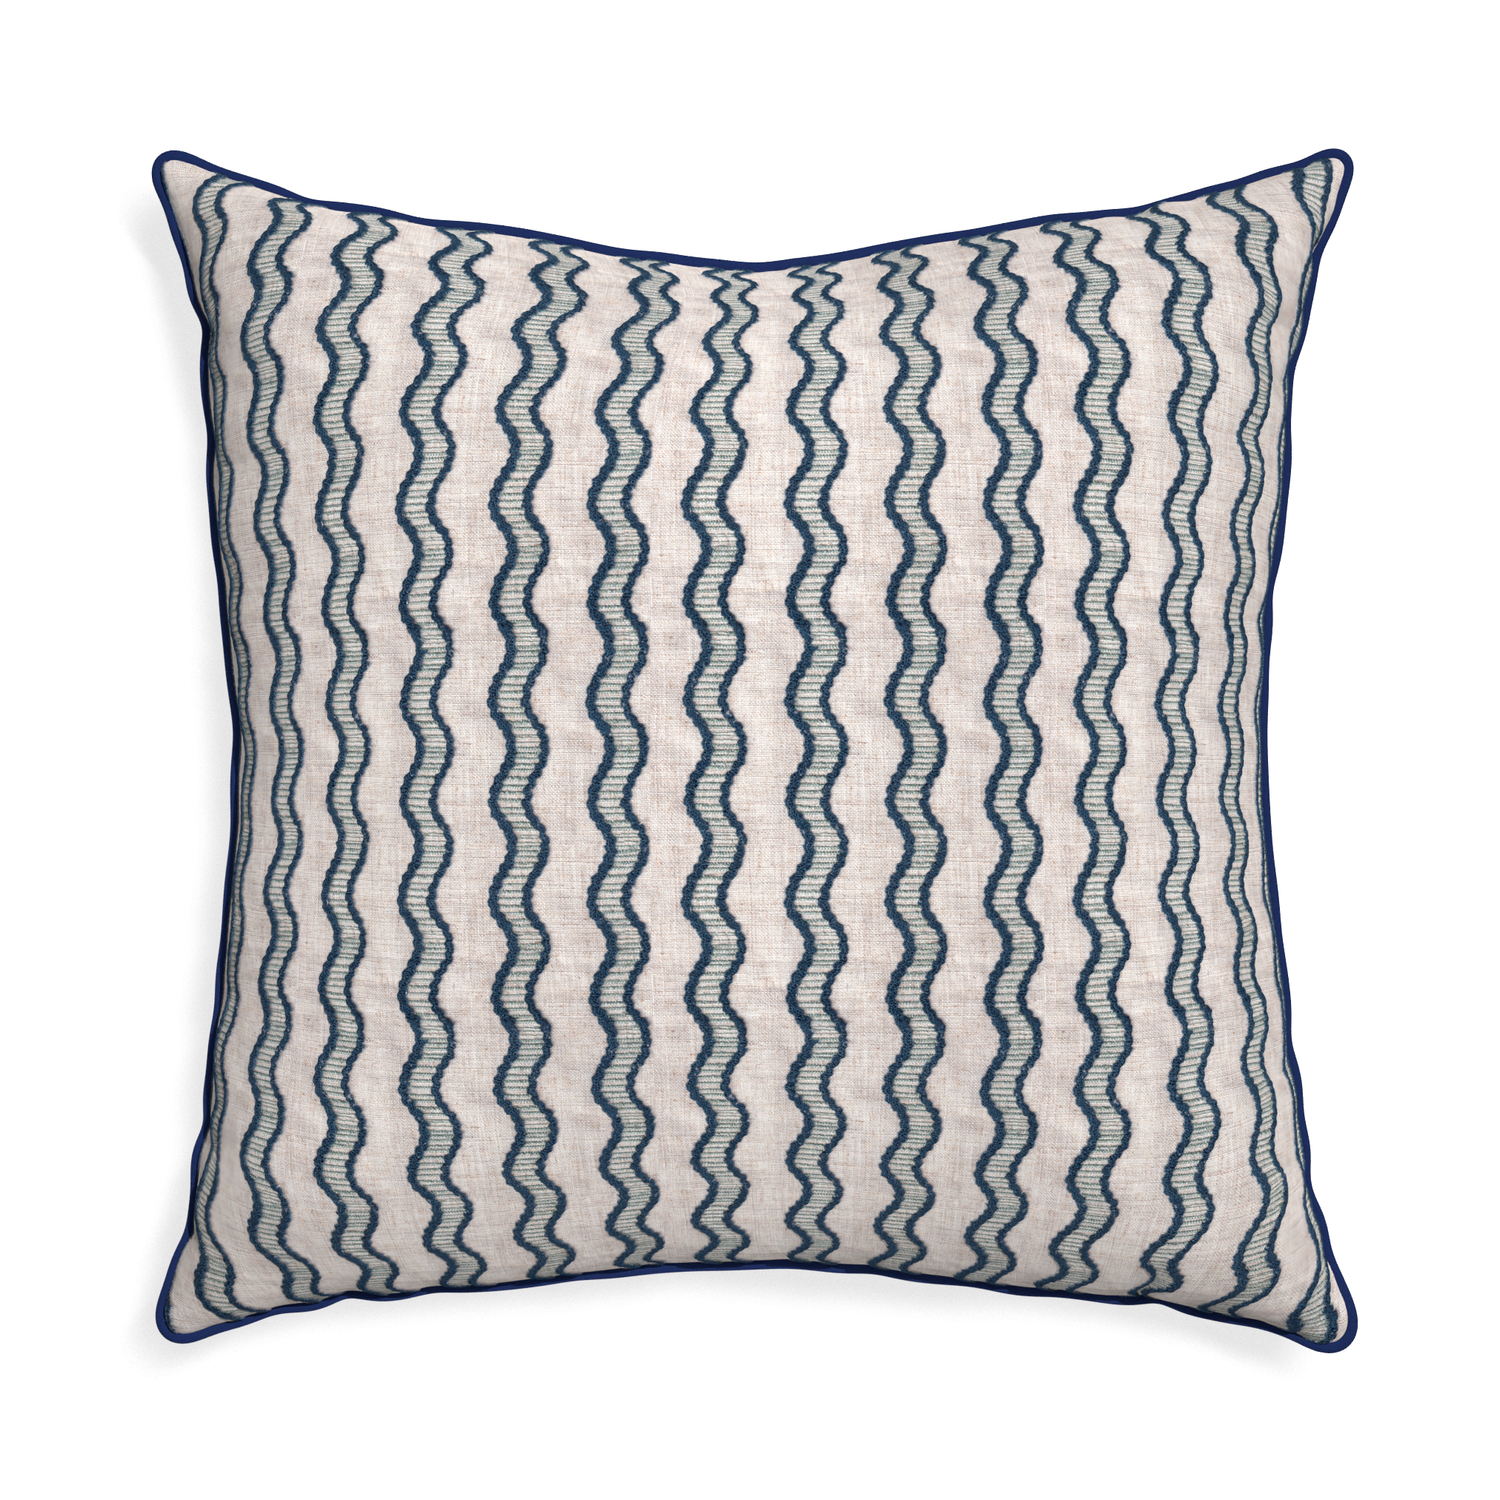 Euro-sham beatrice custom embroidered wavepillow with midnight piping on white background